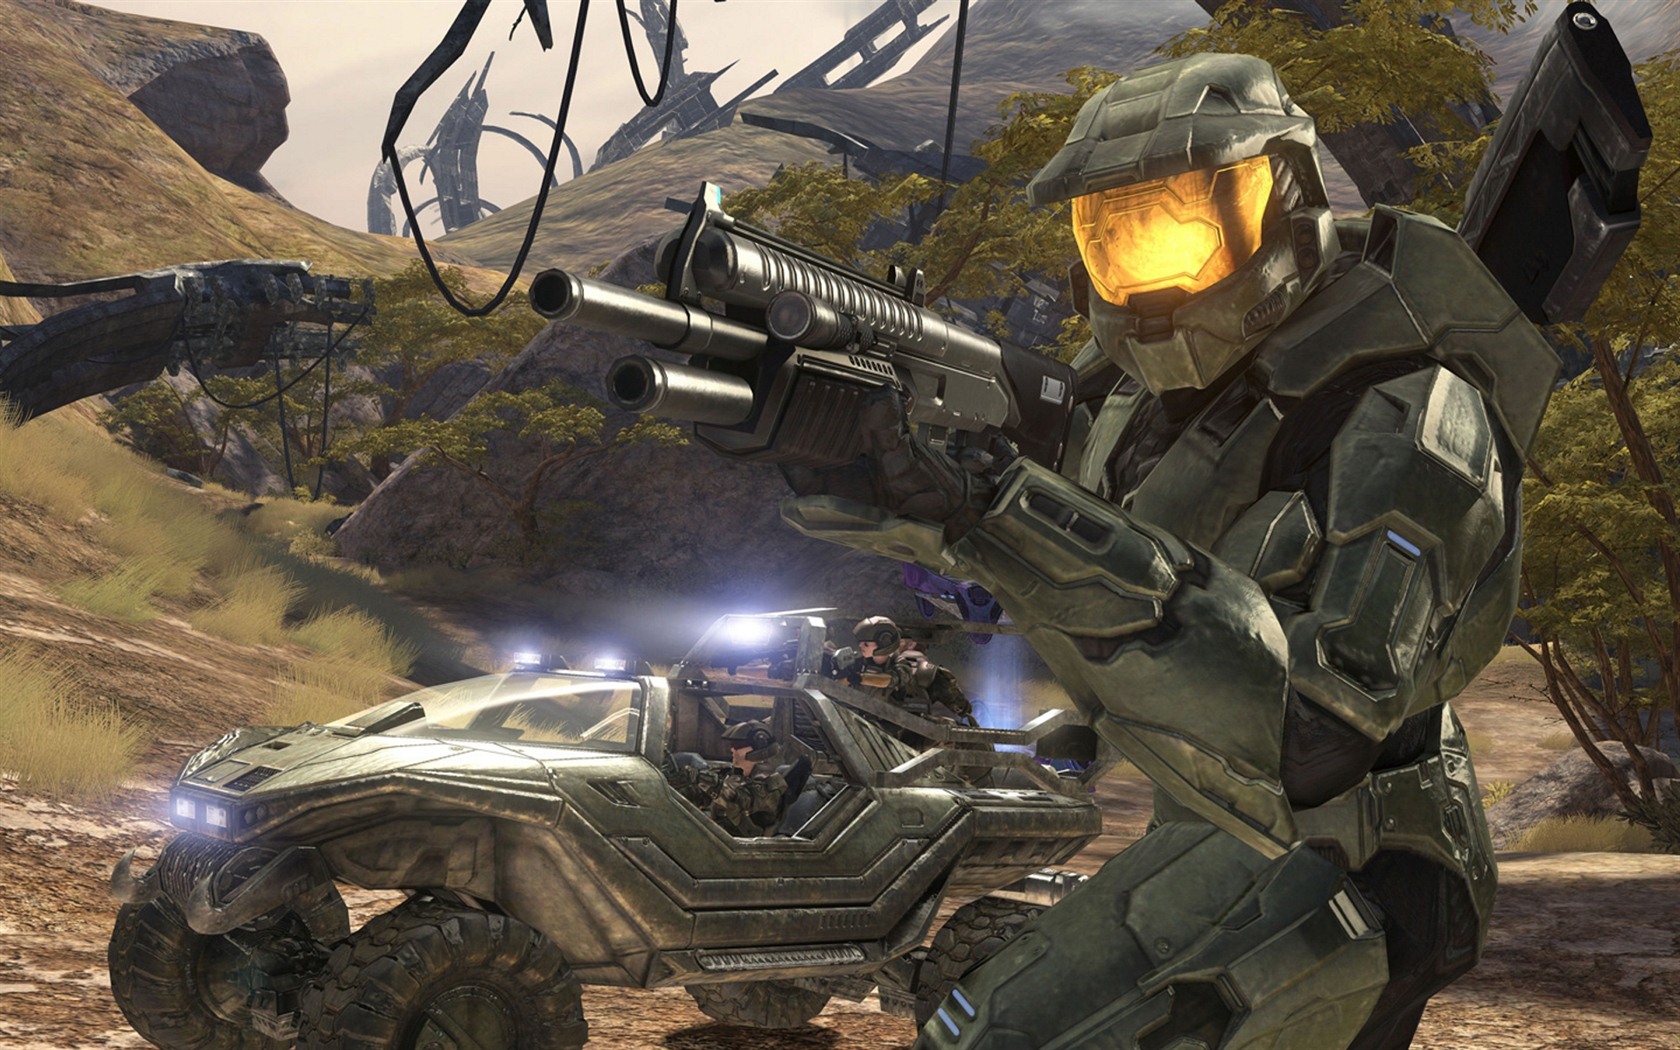 Halo Game HD Wallpapers #13 - 1680x1050